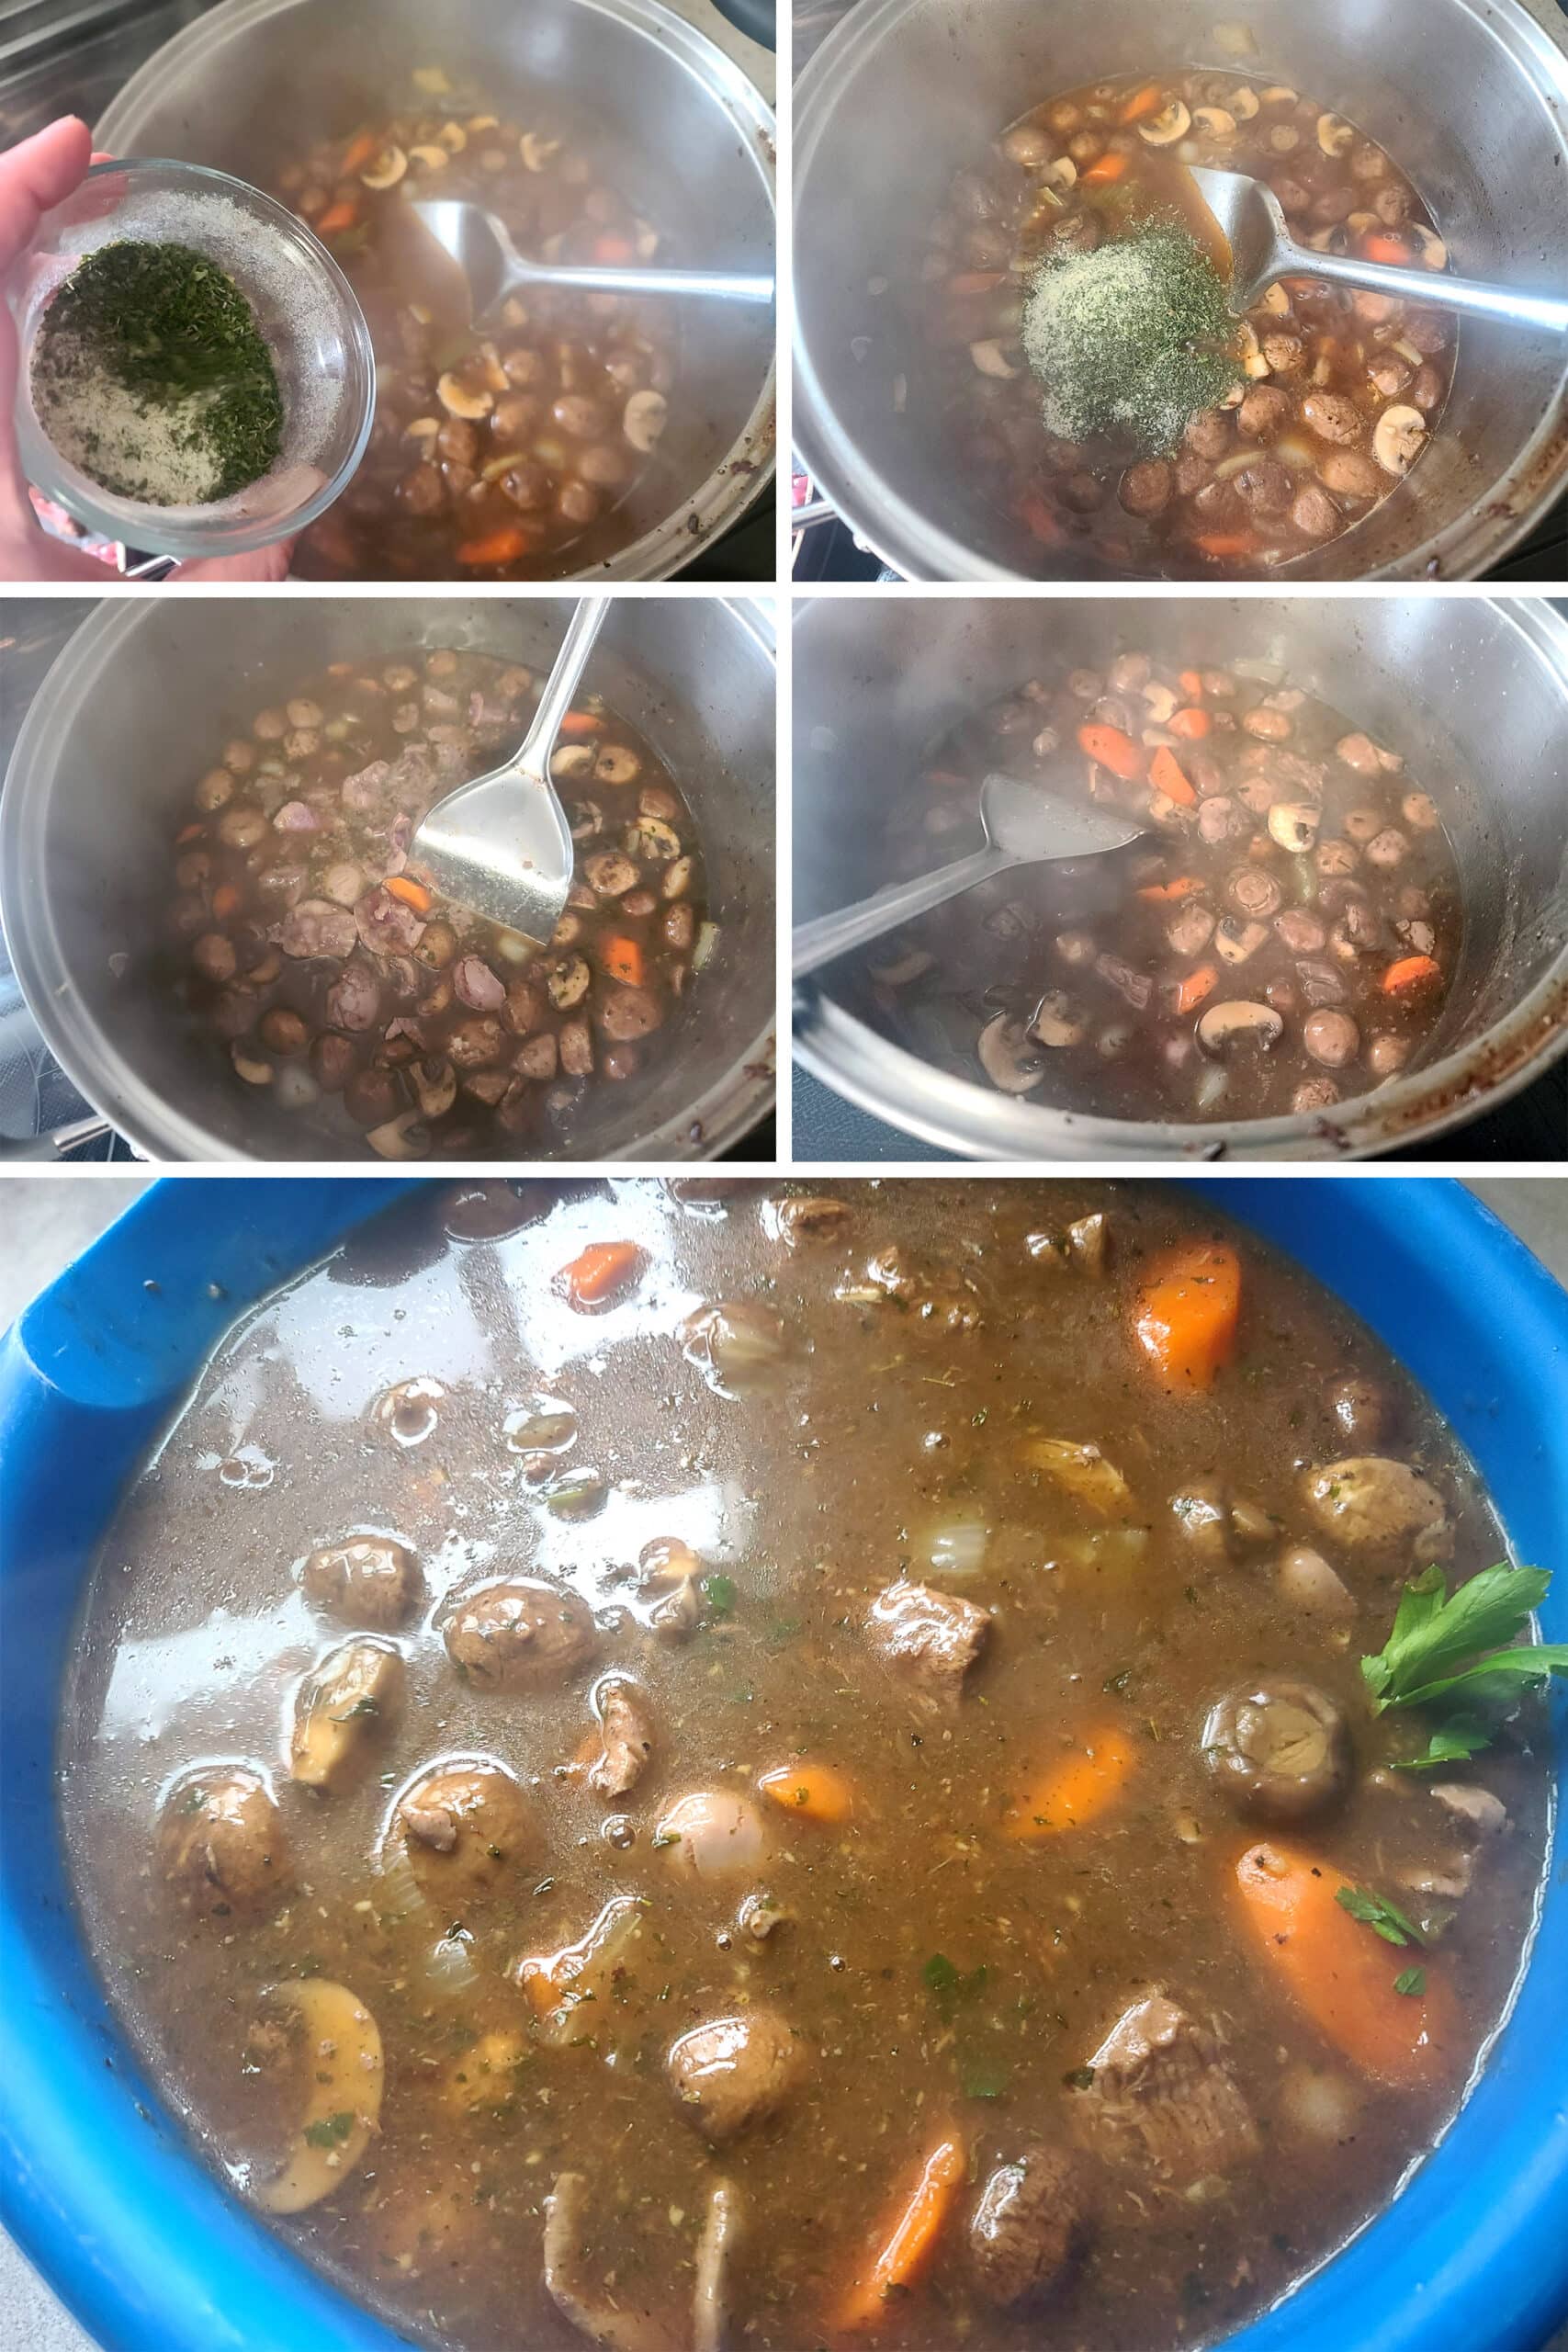 A 5 part image showing the dry mix and kidneys being added to the pot, and the finished stew in a large storage bowl.